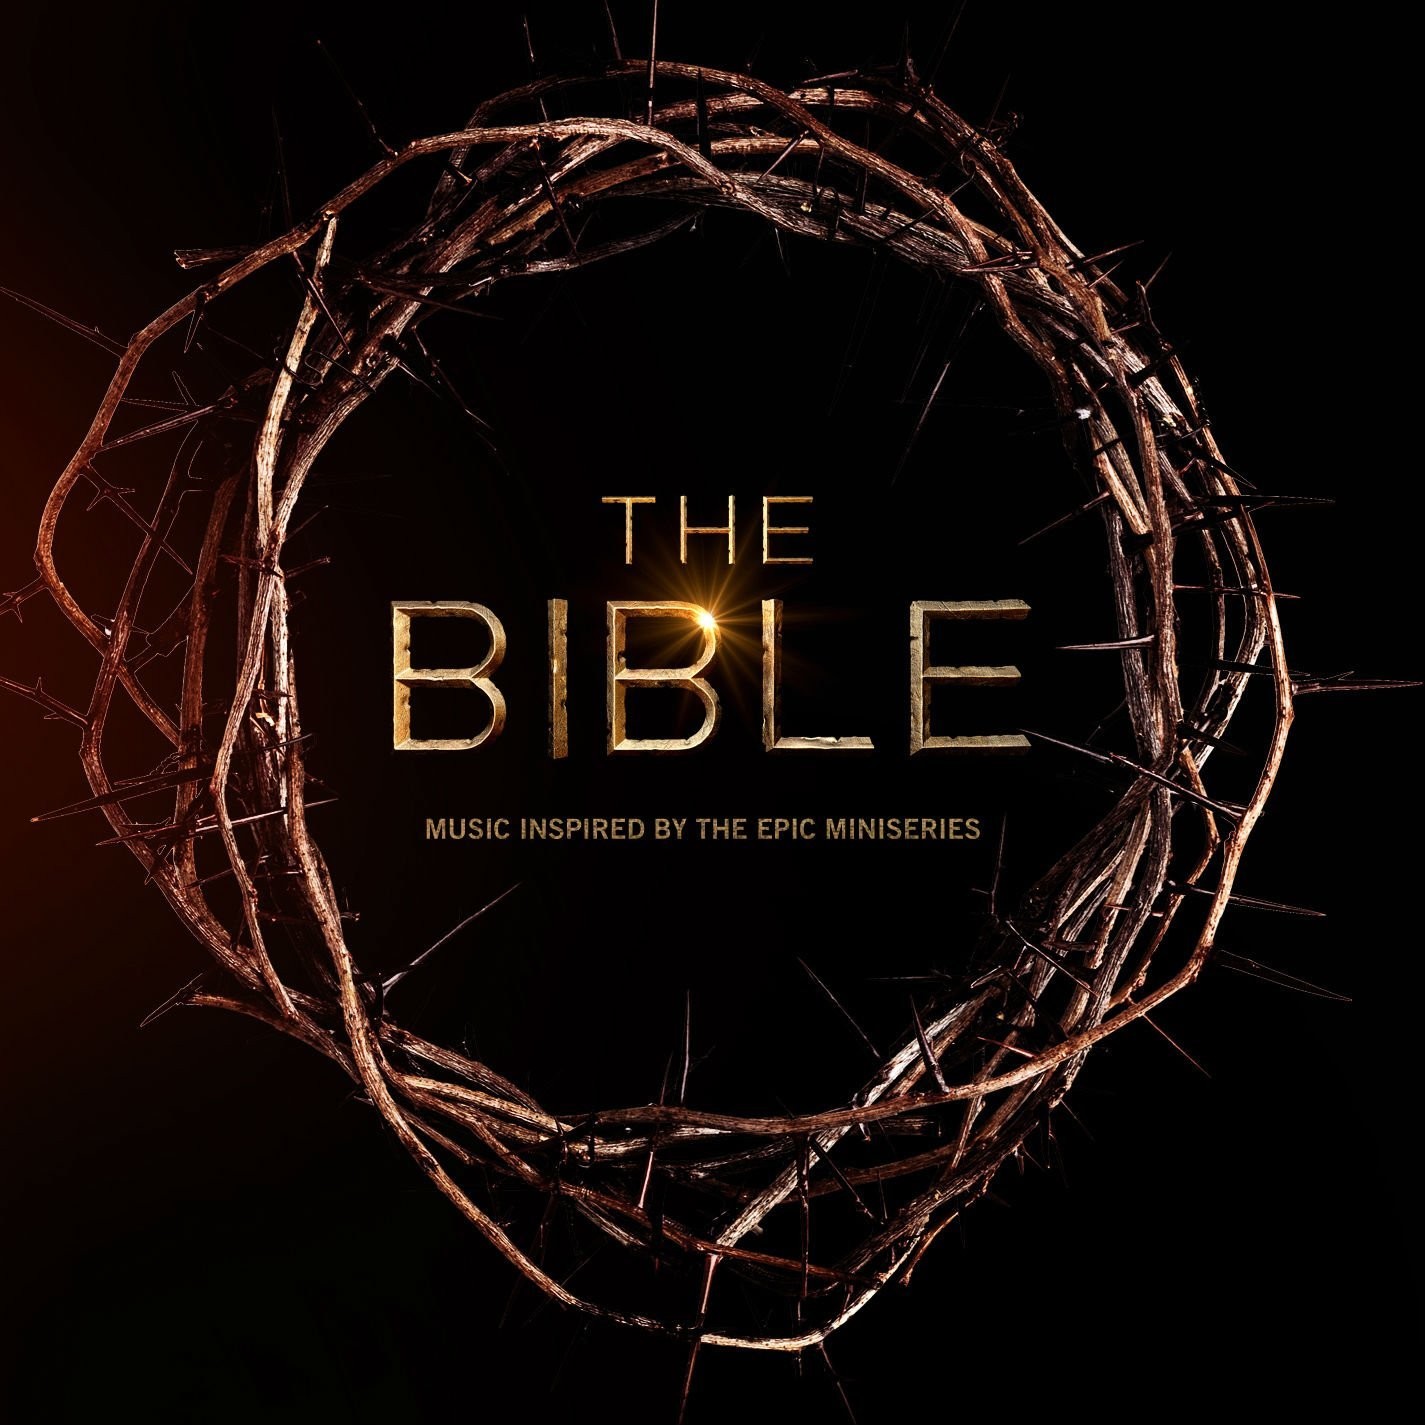 The Bible: music inspired by the epic miniseries